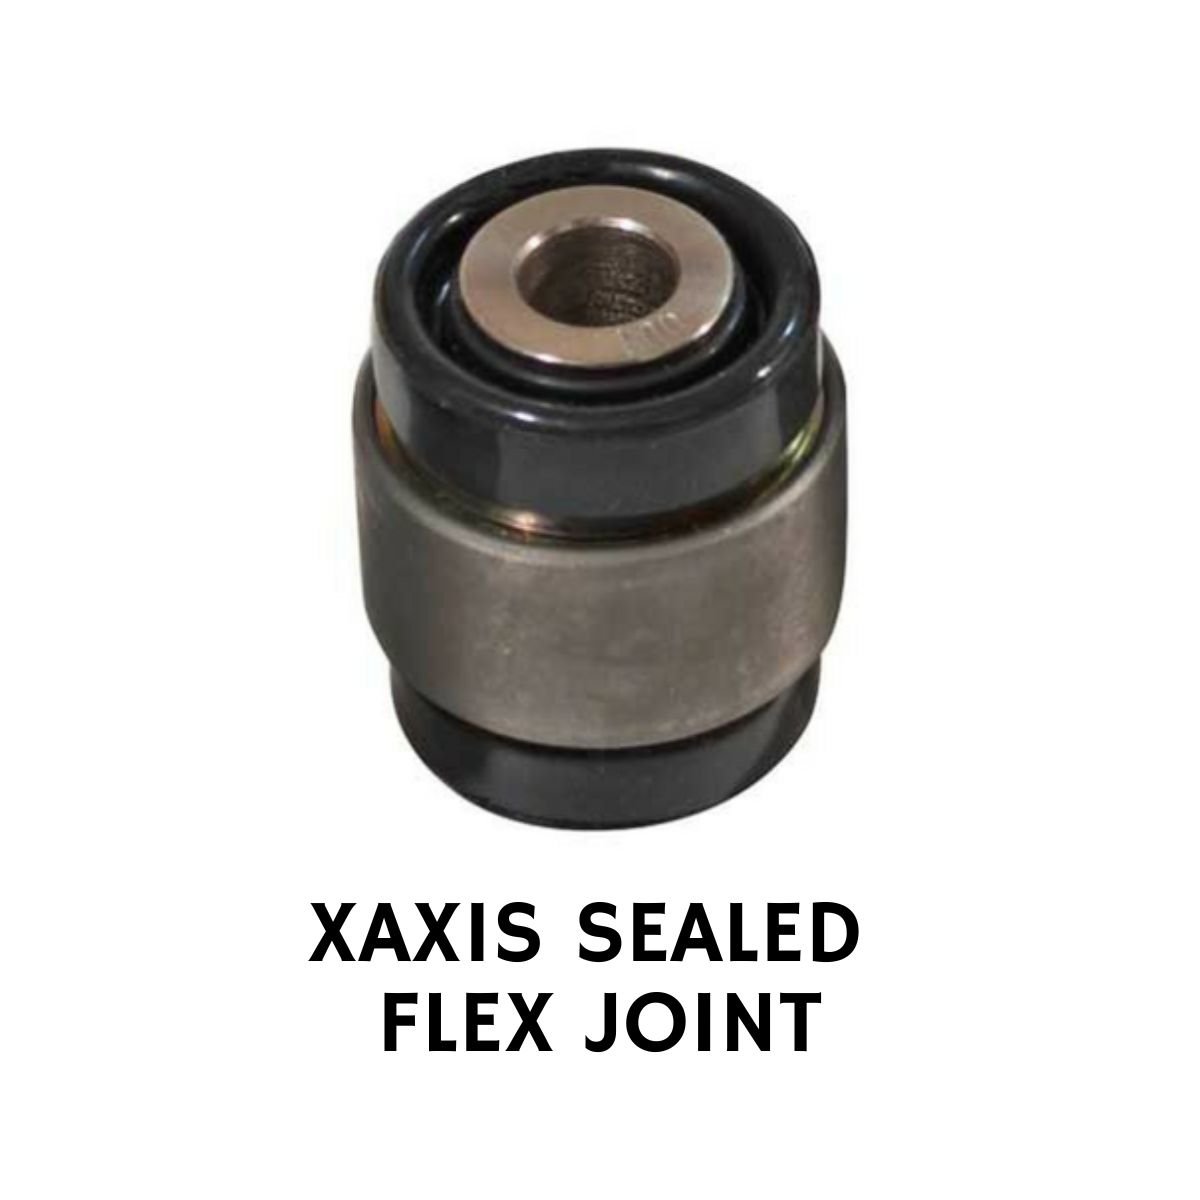 XAXIS SEALED FLEX JOINT